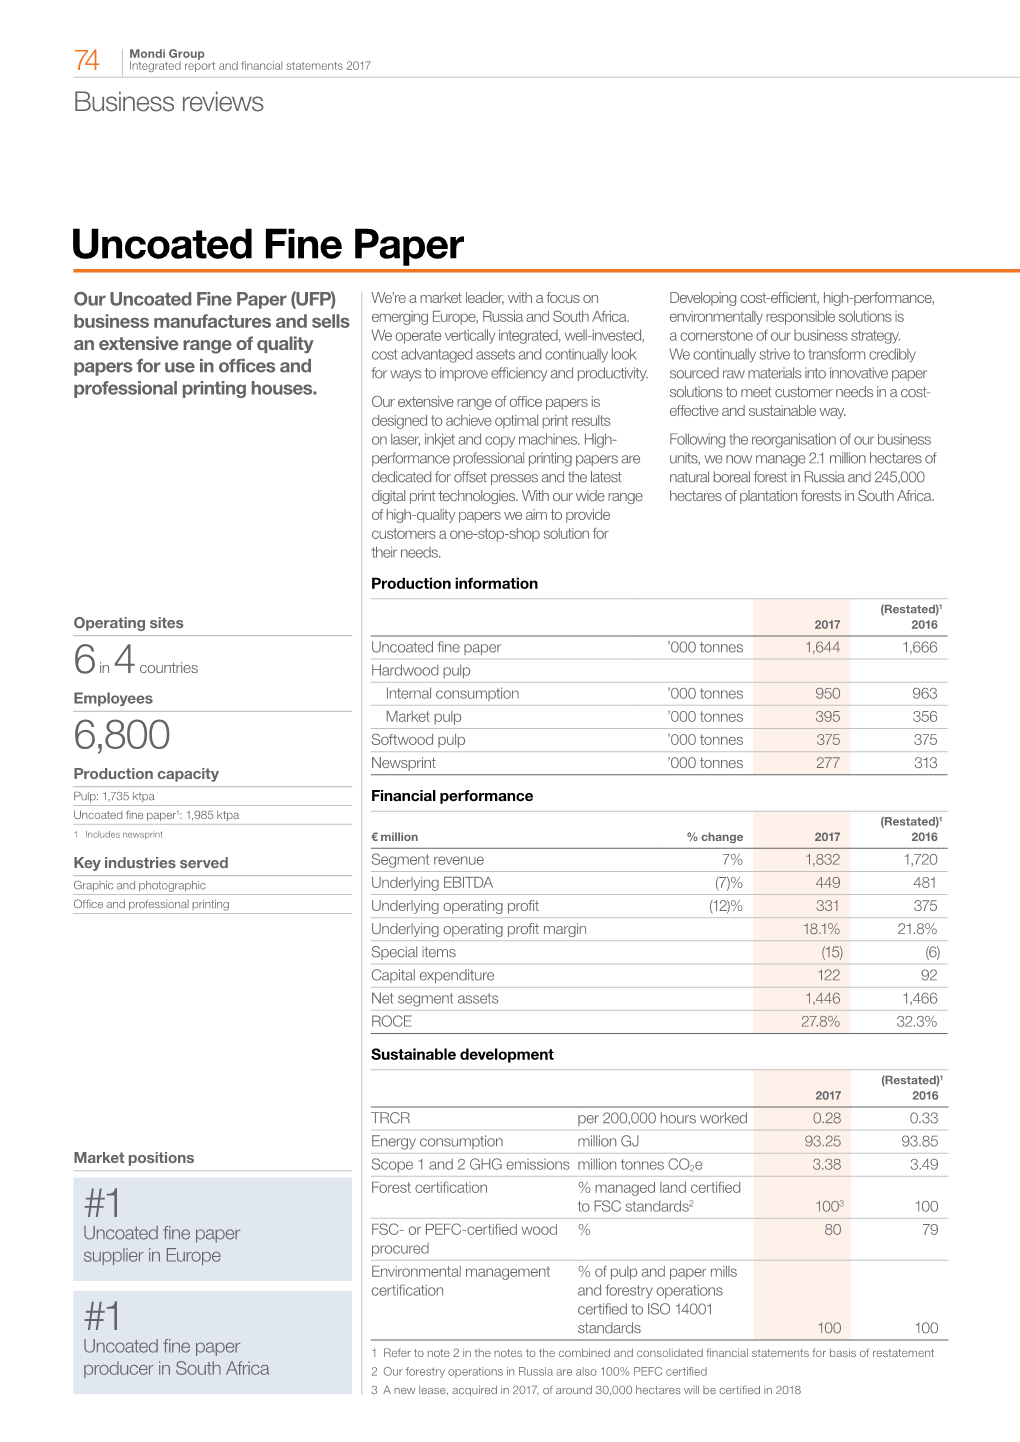 Uncoated Fine Paper #1 #1 6,800